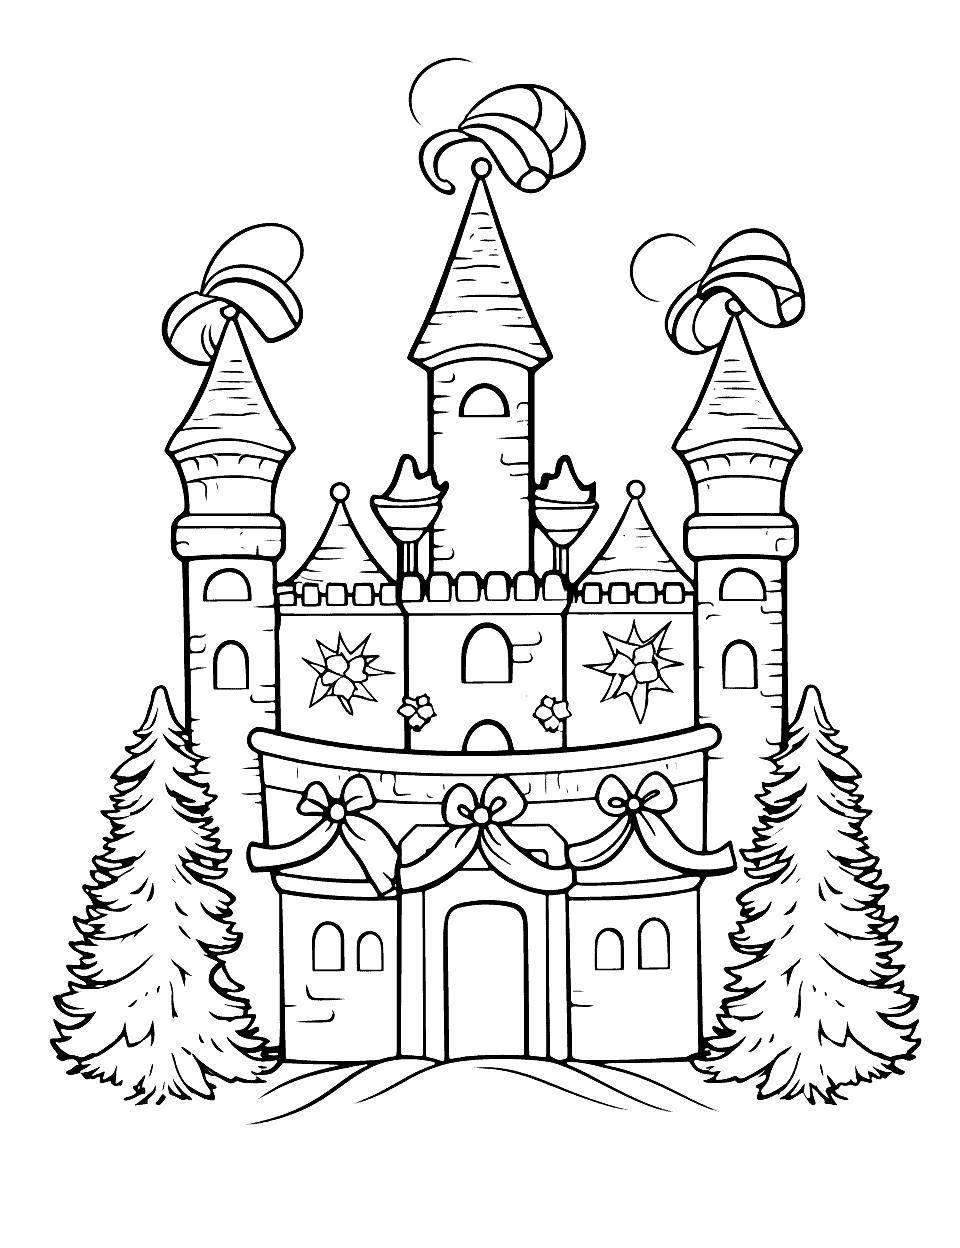 Christmas at the Castle Coloring Page - A grand castle decked out in festive lights and wreaths.